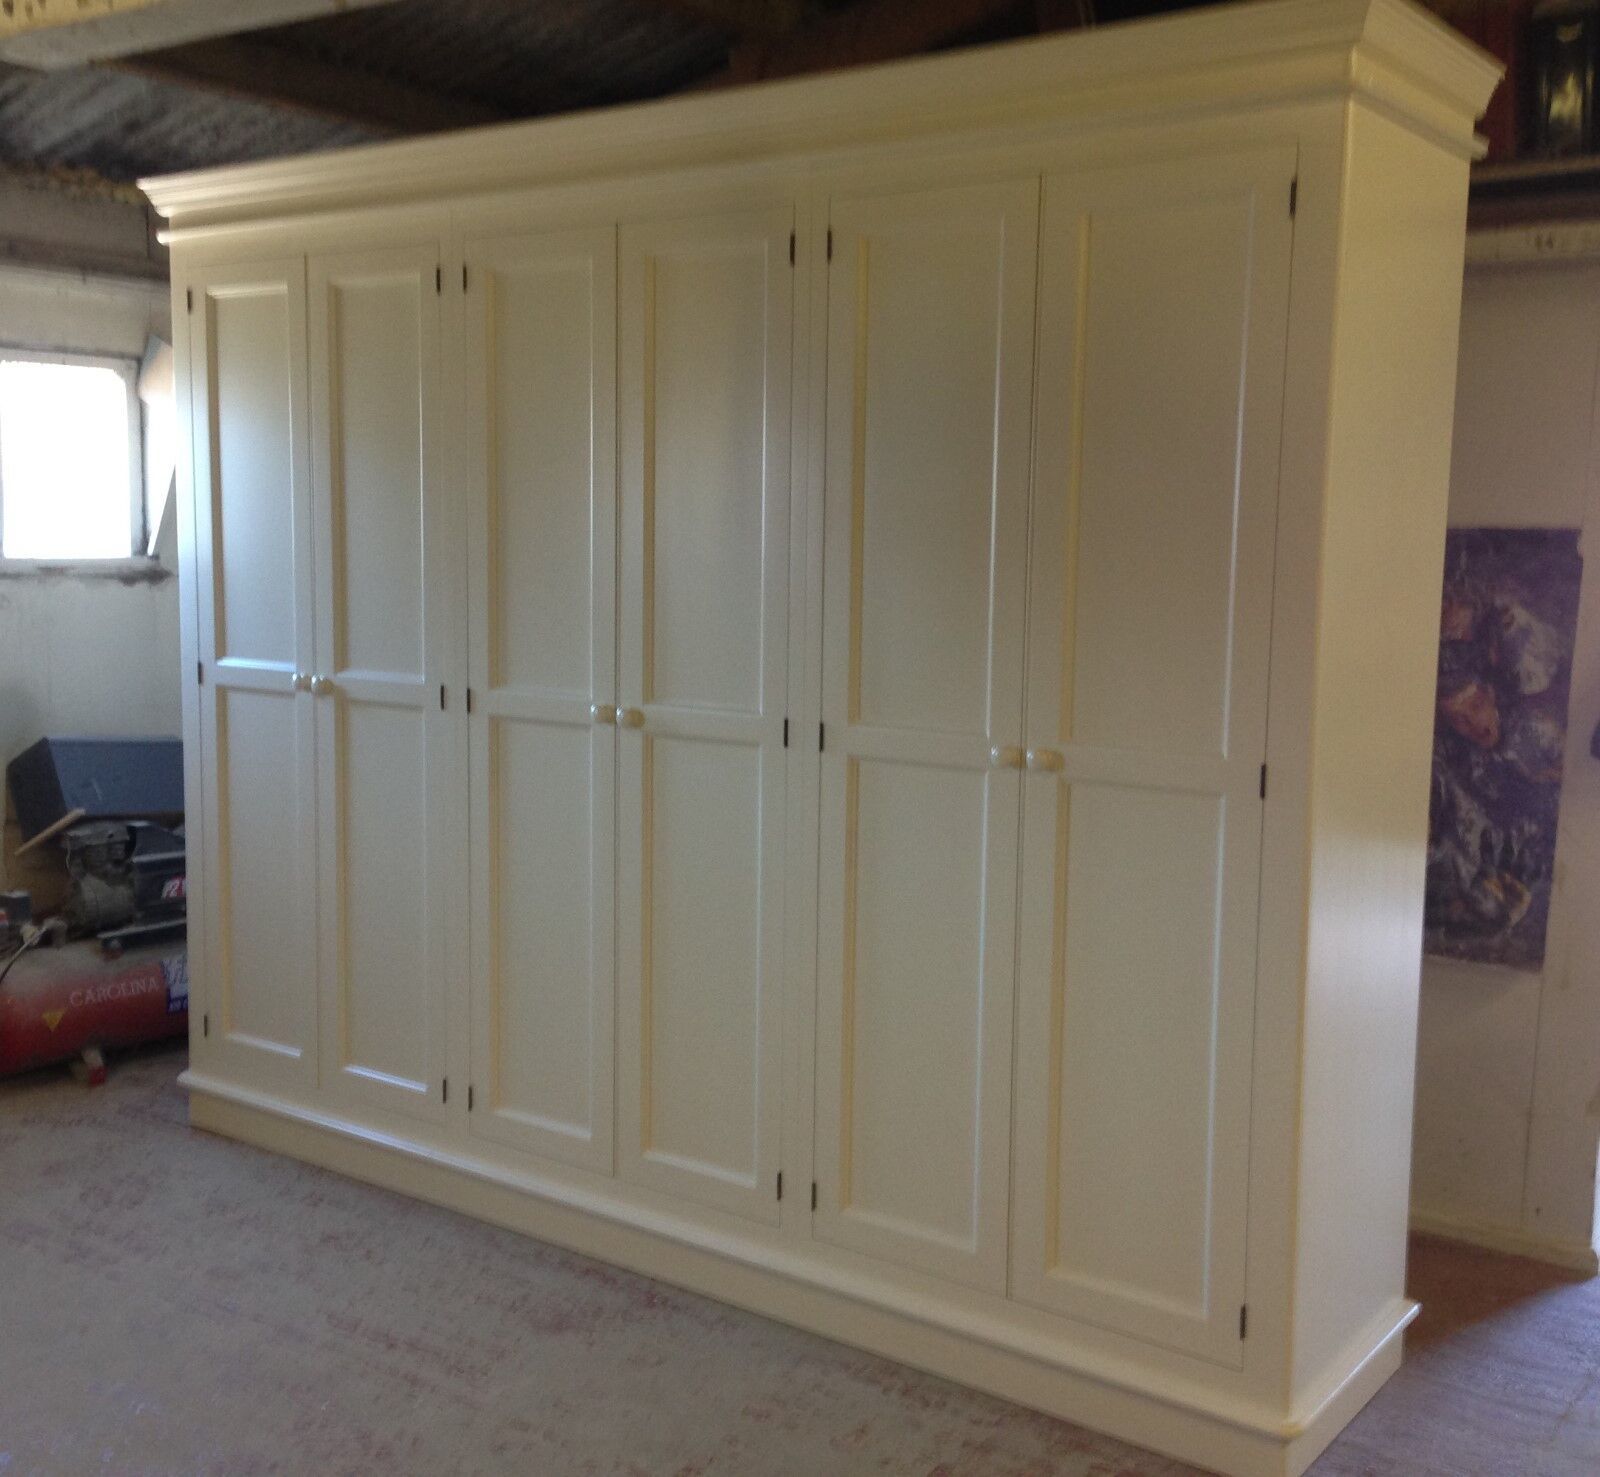 Wardrobe – Painted 6 Door Full Hanging – Victorian Style With Plinth | Ebay Pertaining To Victorian Wardrobes (View 11 of 15)